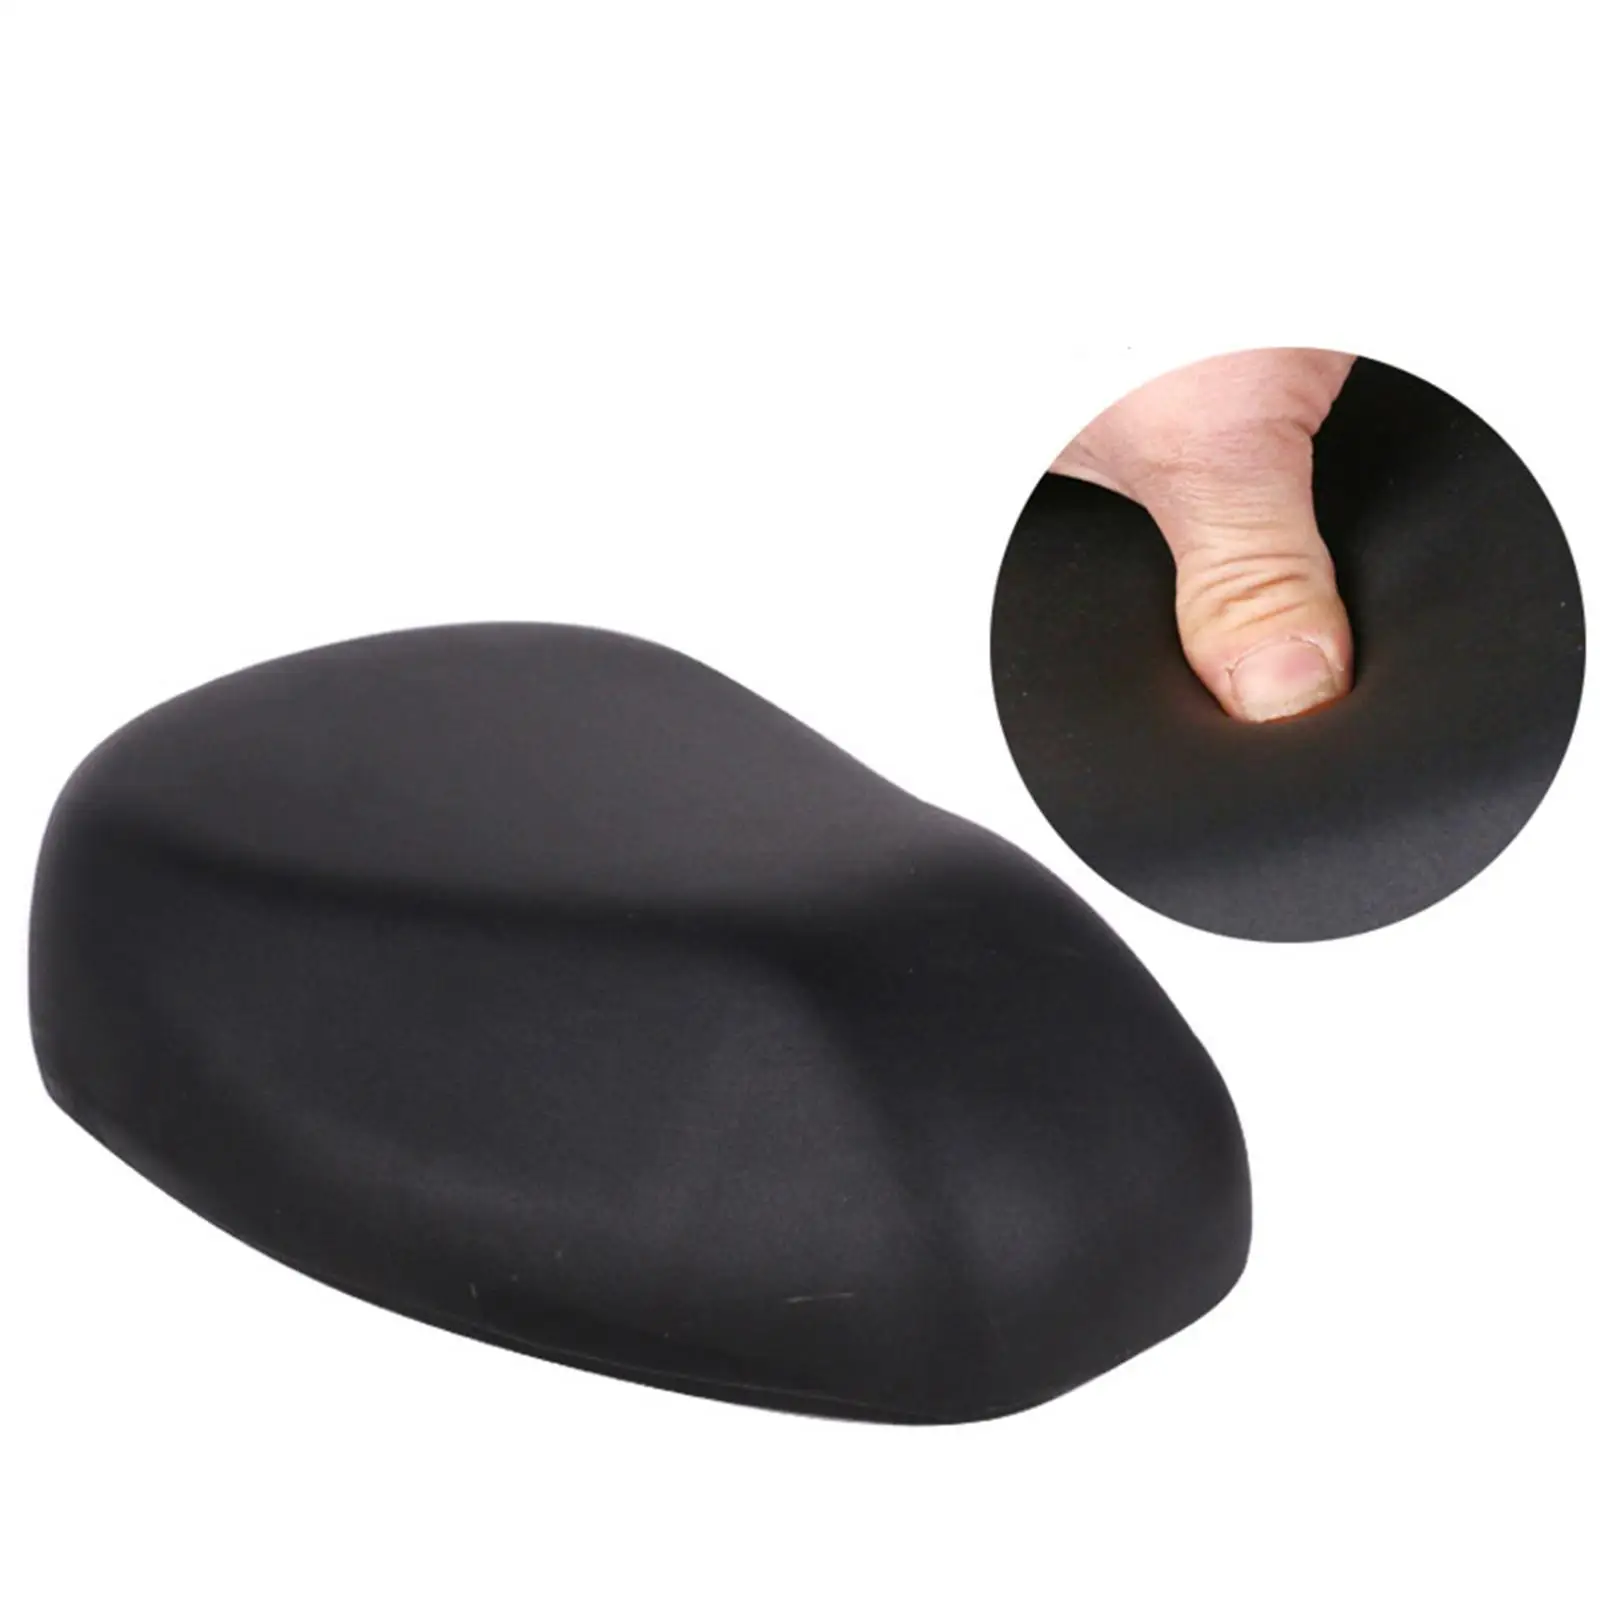 Bike Seat Cushion Cover Saddle Shock Absorbing Comfortable Padded Easy Mount Firm Fits for Electric Scooter MTB Bike Road Bike